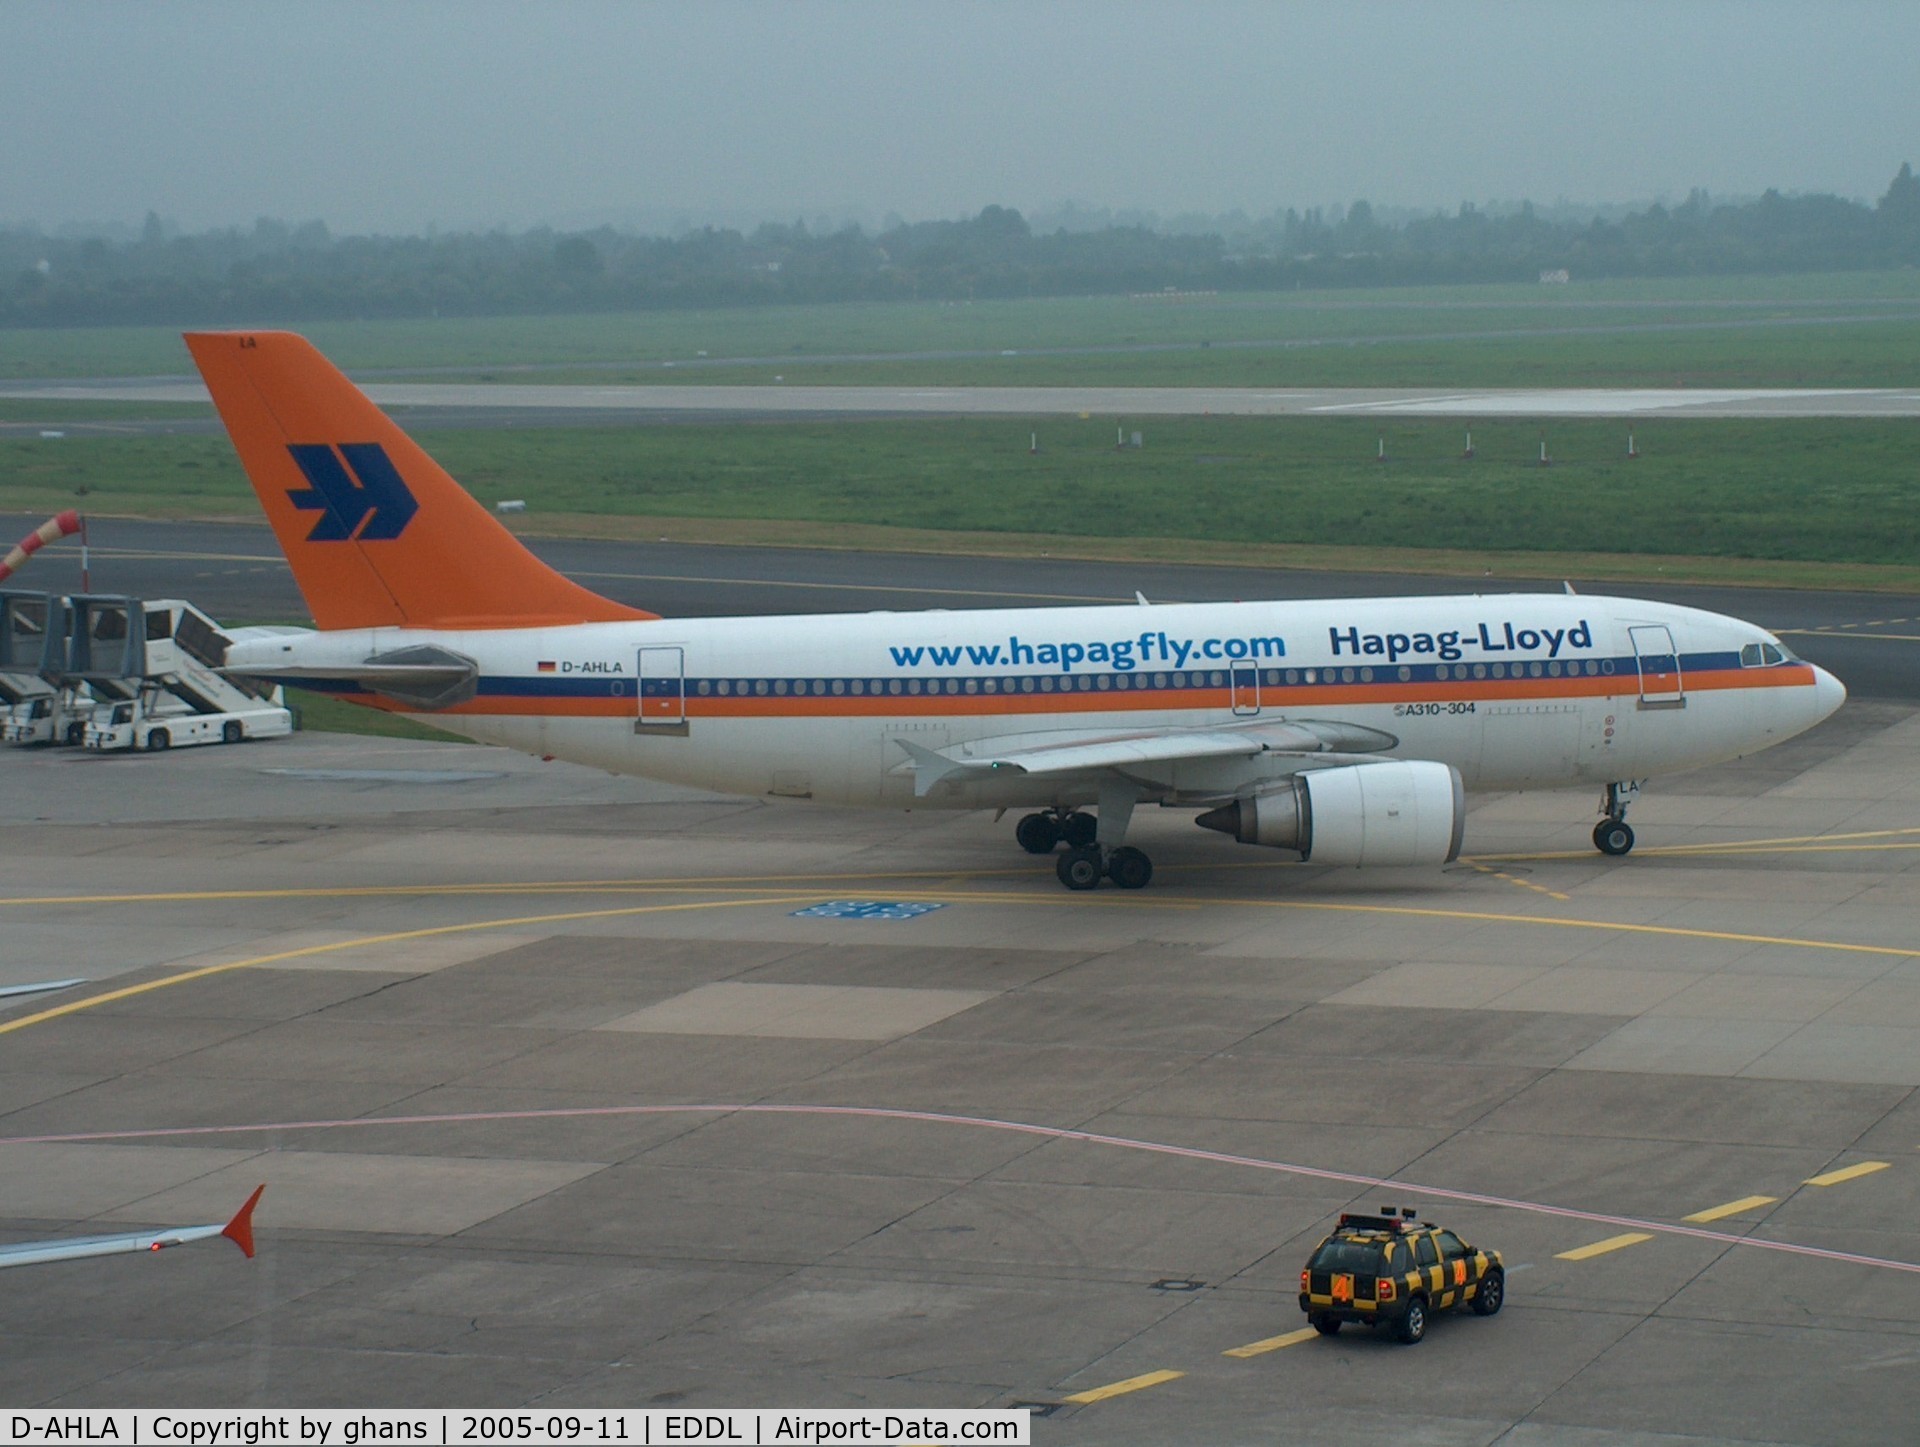 D-AHLA, 1989 Airbus A310-304 C/N 520, Still in old Hapag colors